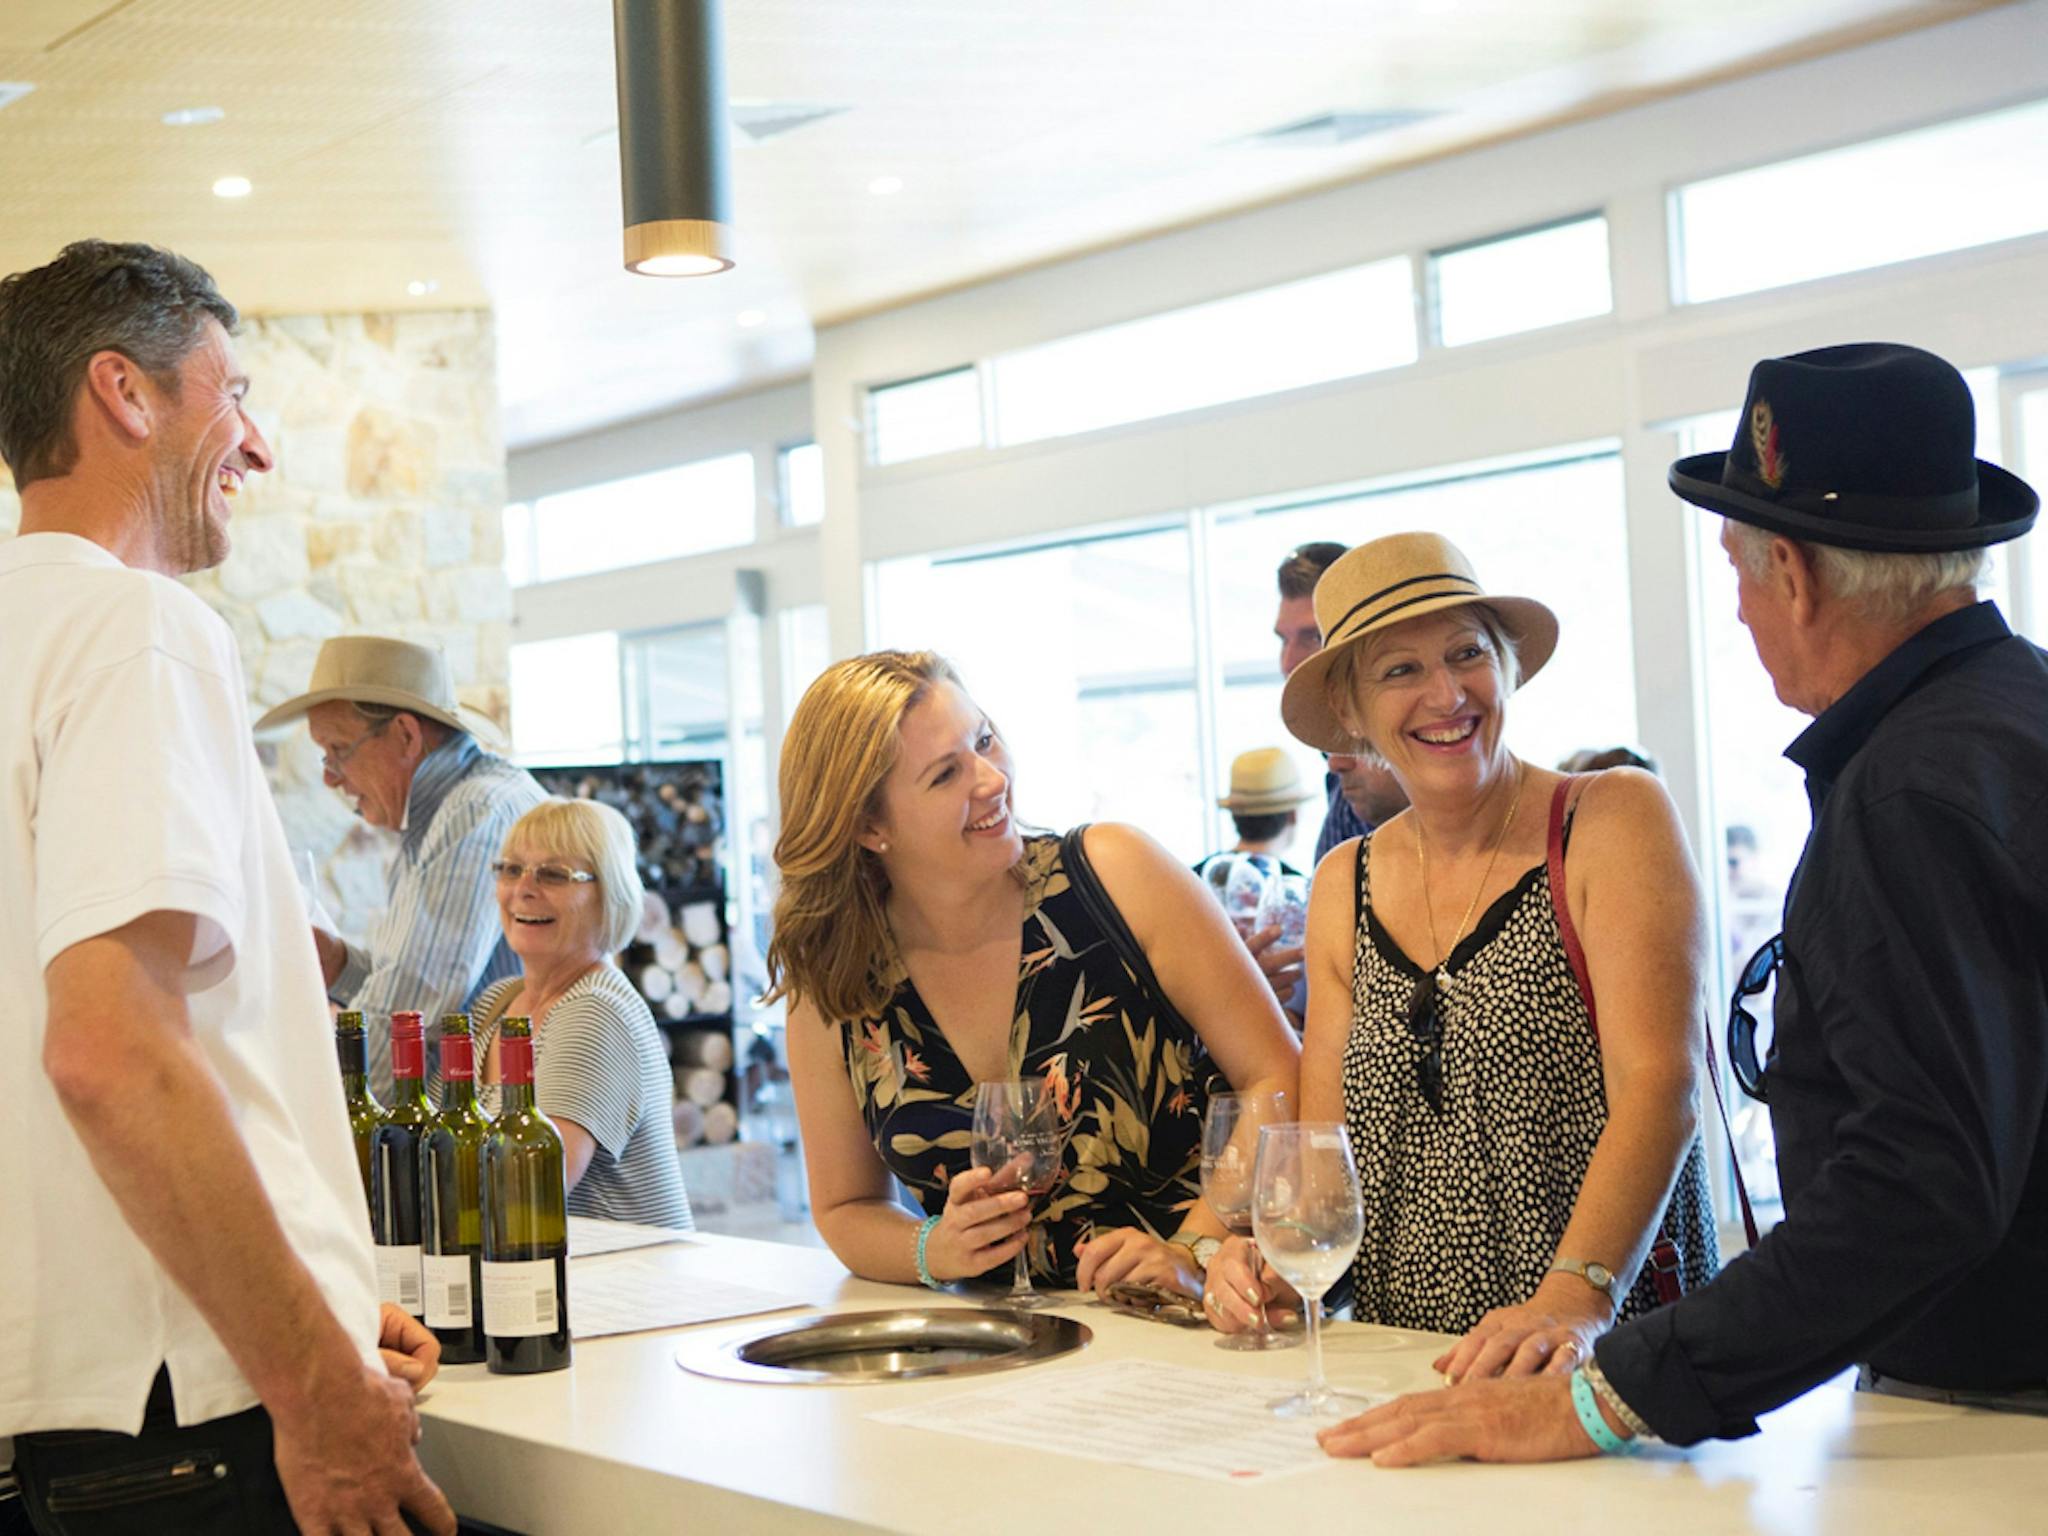 Enjoy a wine tasting with friends at our cellar door